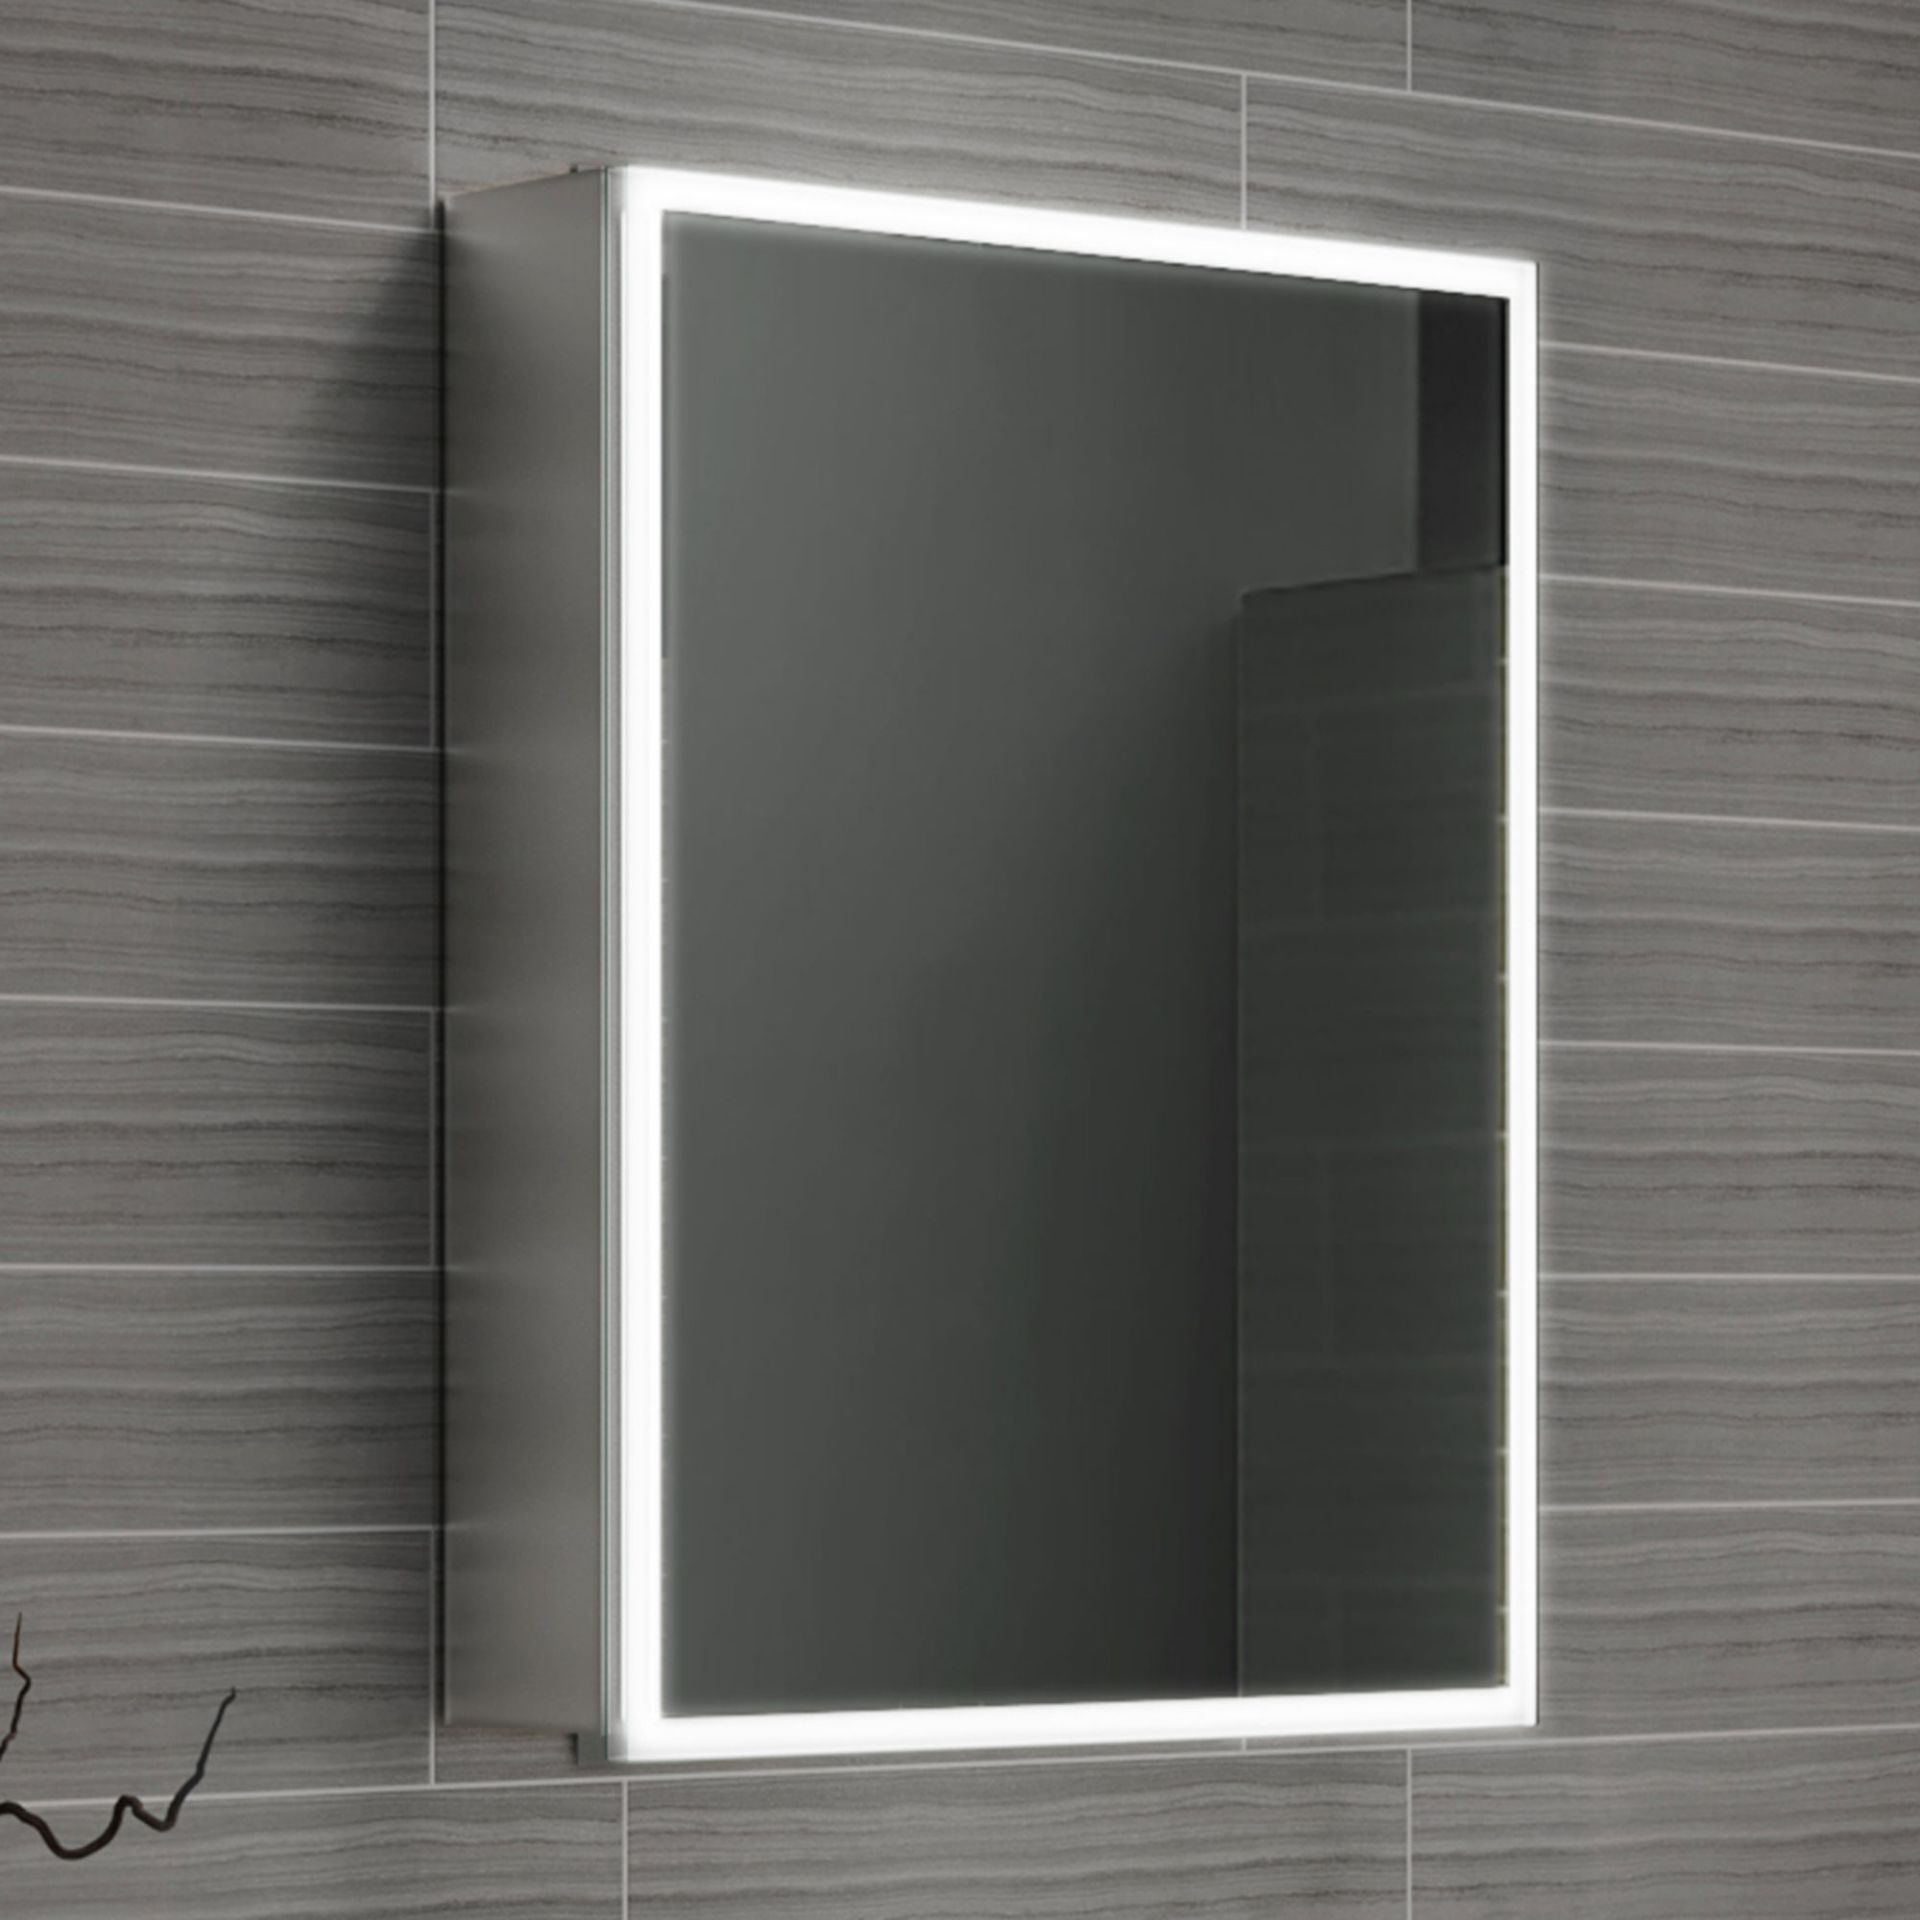 (SP58) 450x600 Cosmic Illuminated LED Mirror Cabinet. RRP £574.99. We love this mirror cabinet as it